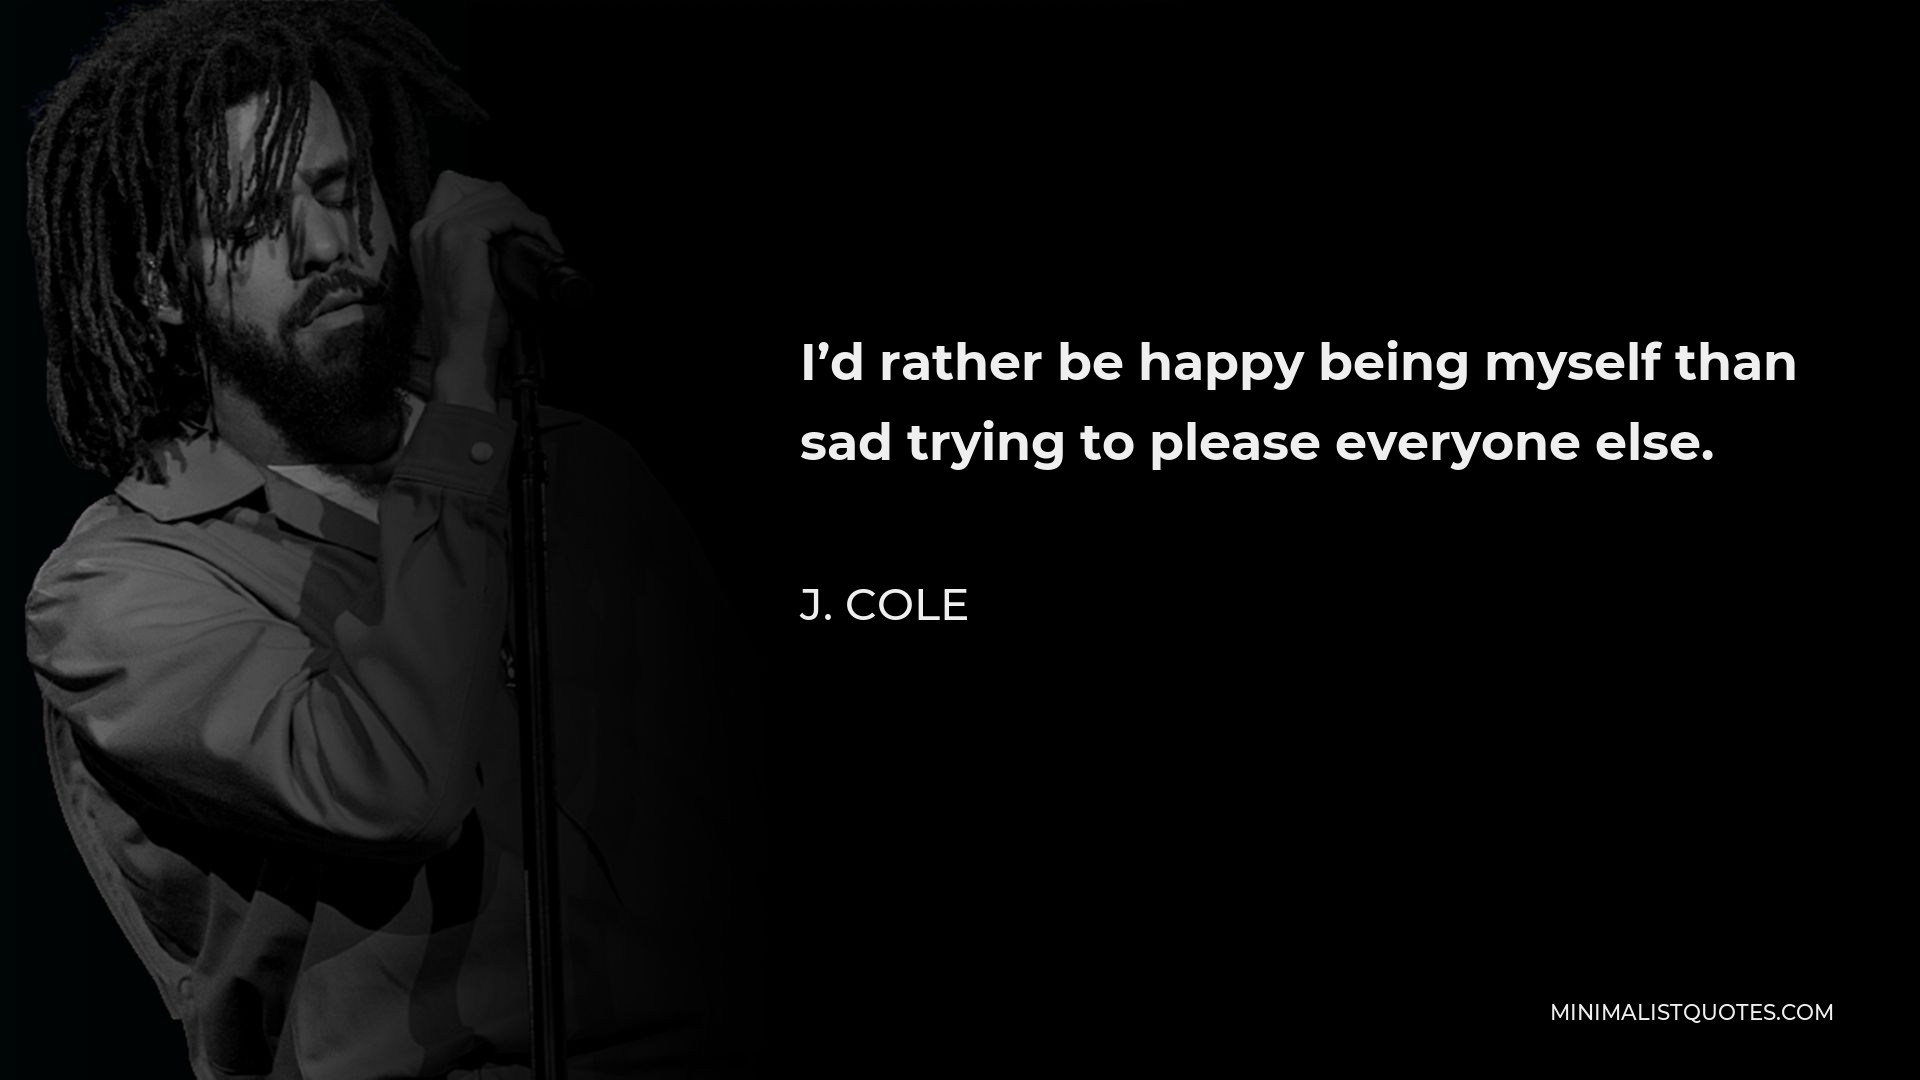 J. Cole Quote - I’d rather be happy being myself than sad trying to please everyone else.